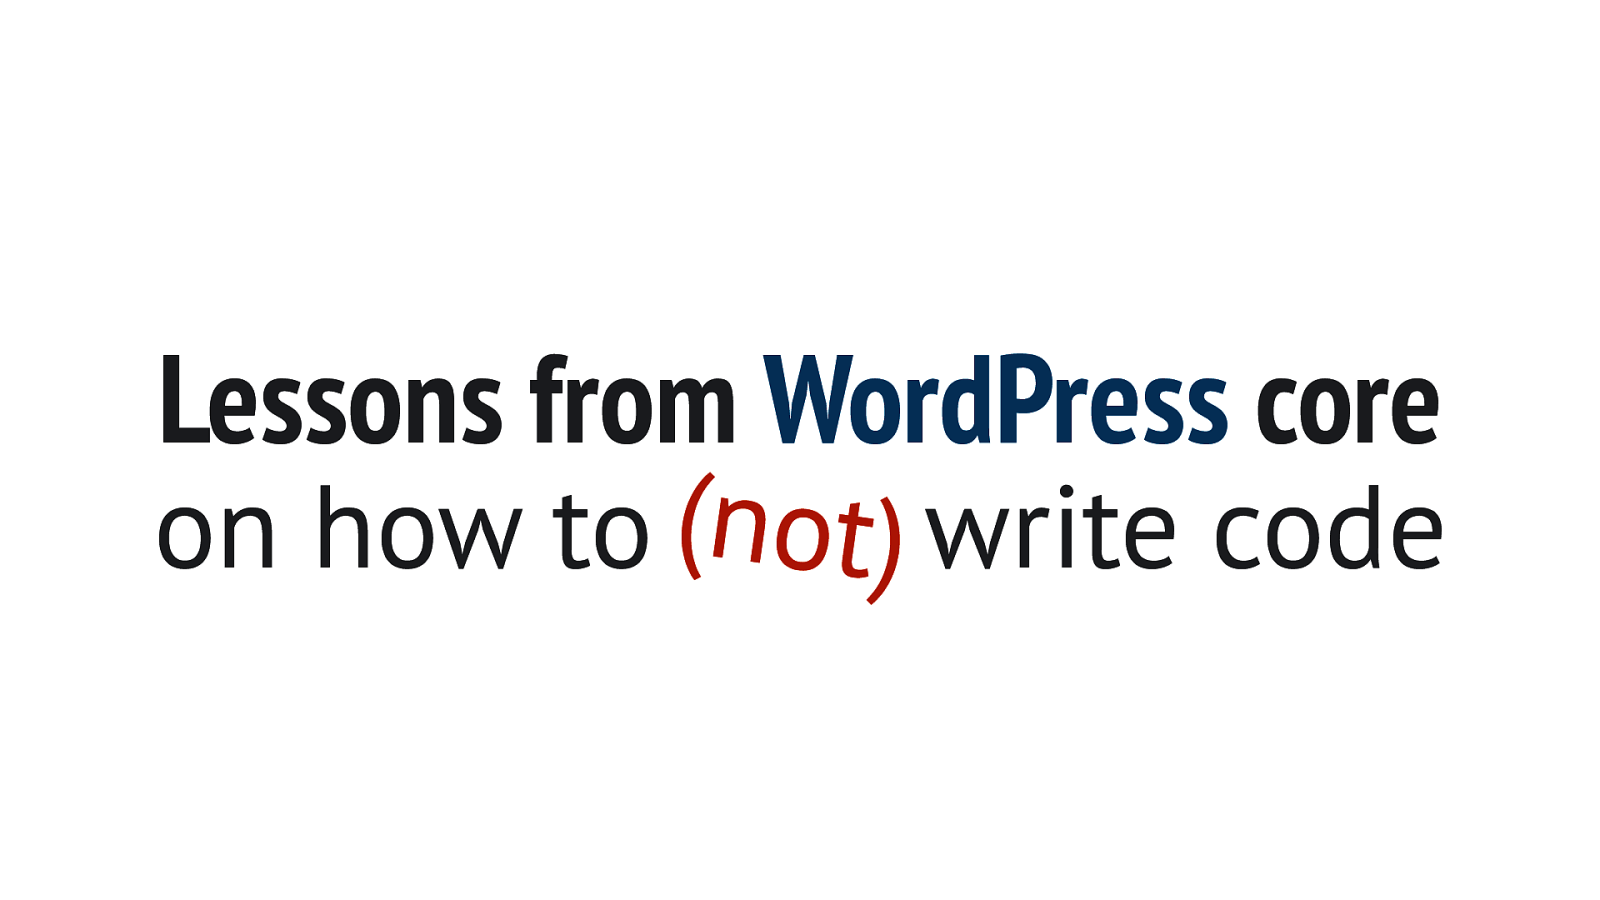 Lessons from WordPress core on how to (not) write code